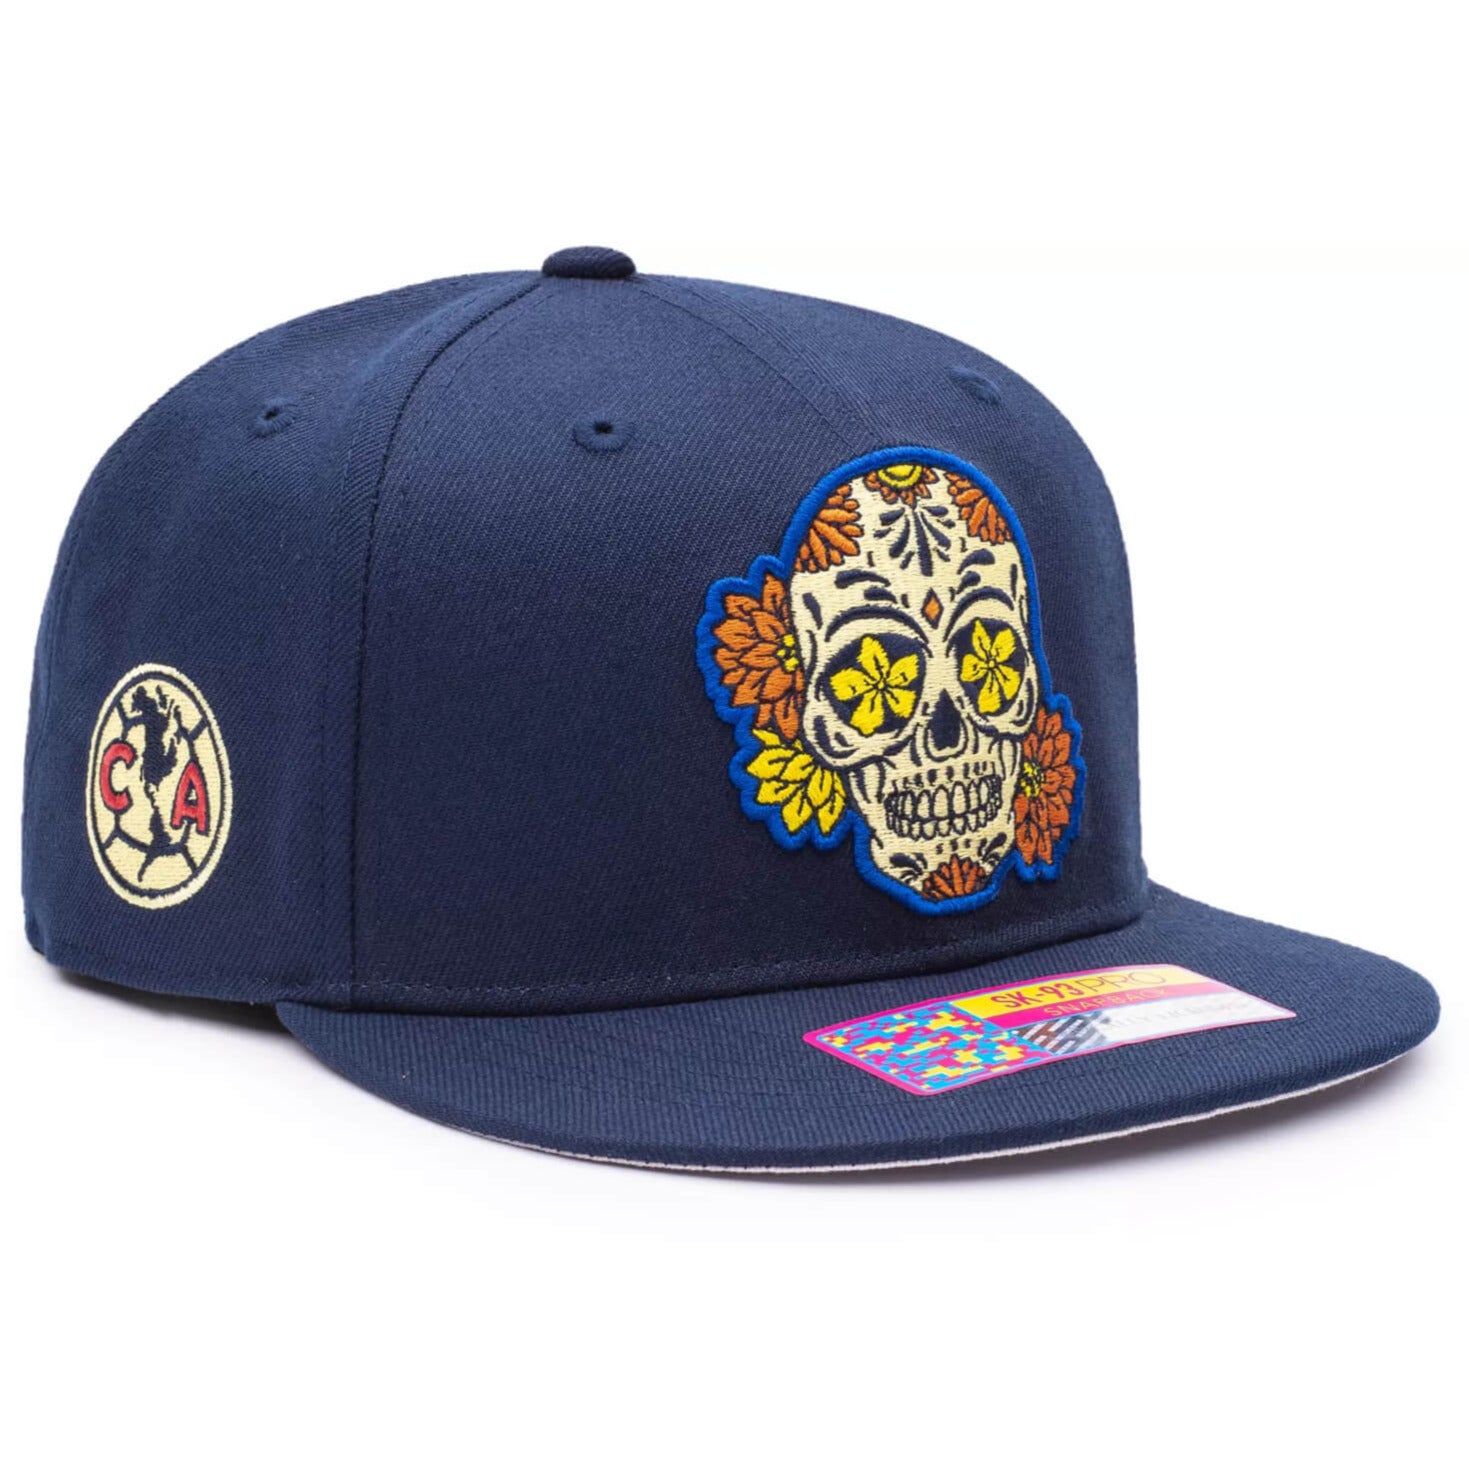 FI Collection Club America Day of the Dead Skull Snapback Hat -Navy-Yellow (Lateral - Side 2)